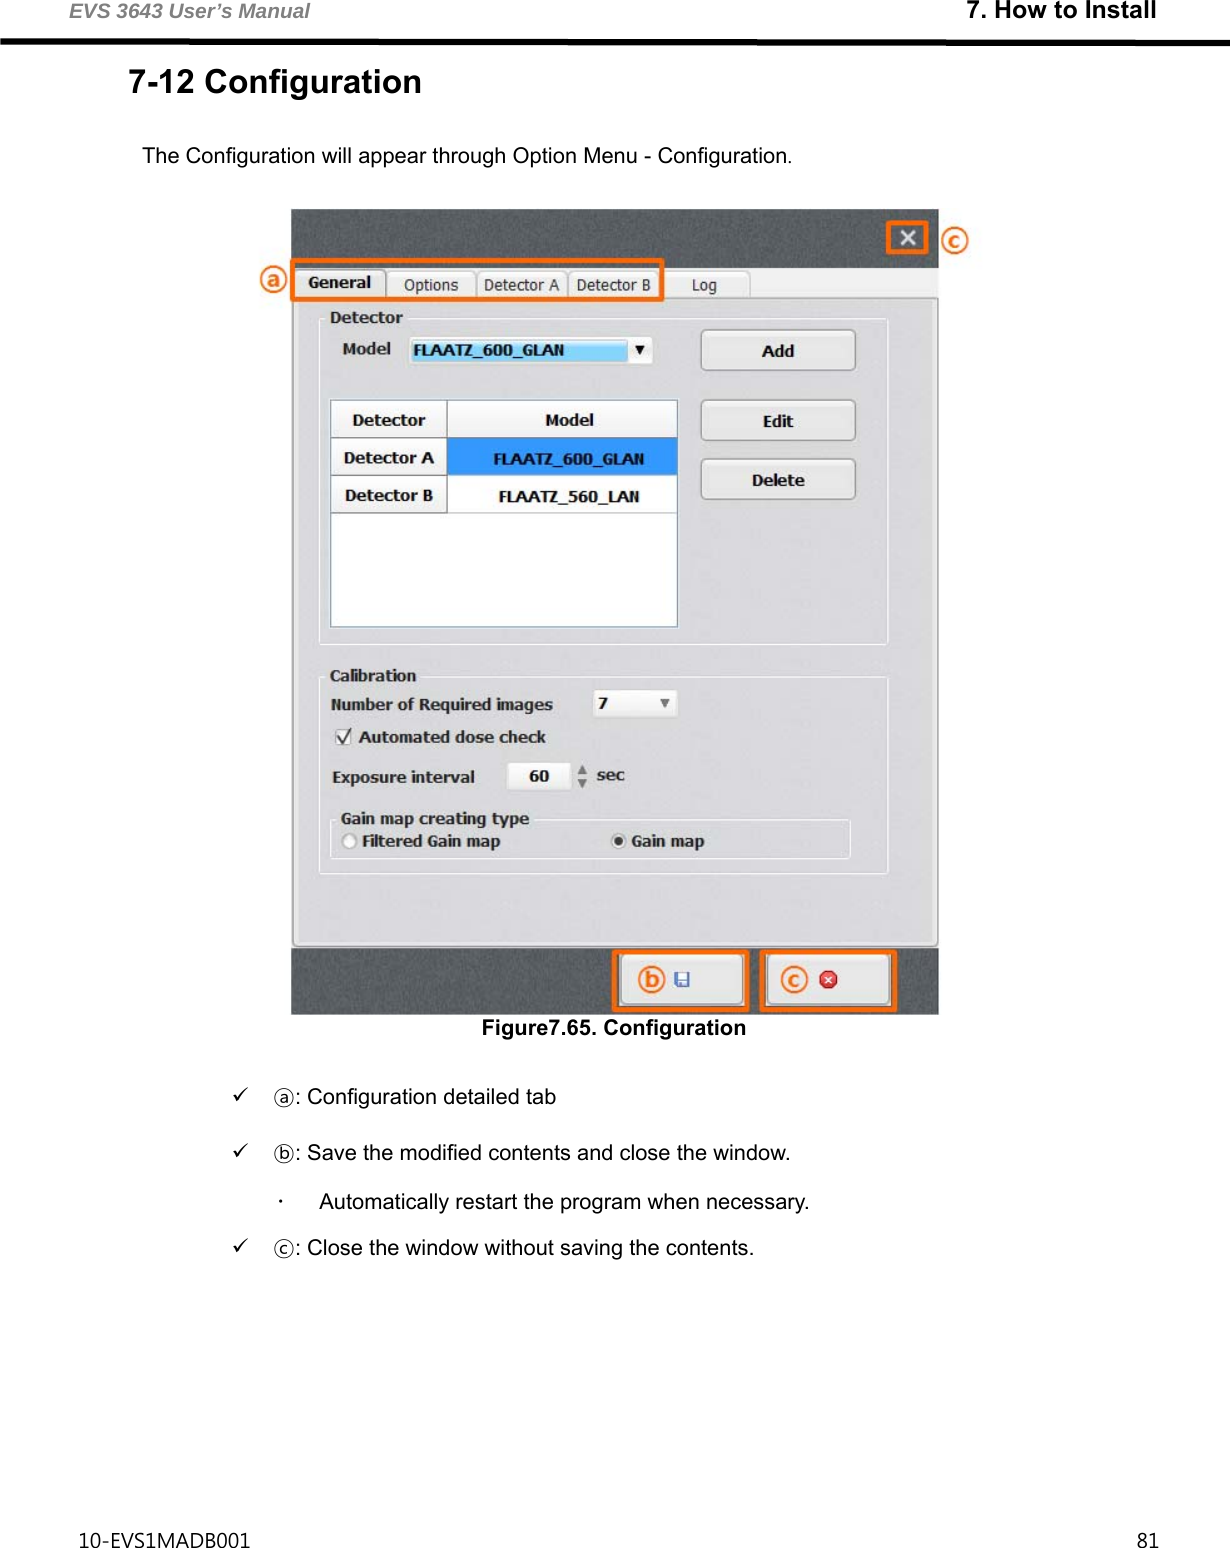 EVS 3643 User’s Manual                                                               7. How to Install 10-EVS1MADB001                                                                                     81  7-12 Configuration         The Configuration will appear through Option Menu - Configuration.   Figure7.65. Configuration   ⓐ: Configuration detailed tab  ⓑ: Save the modified contents and close the window.   Automatically restart the program when necessary.  ⓒ: Close the window without saving the contents.    